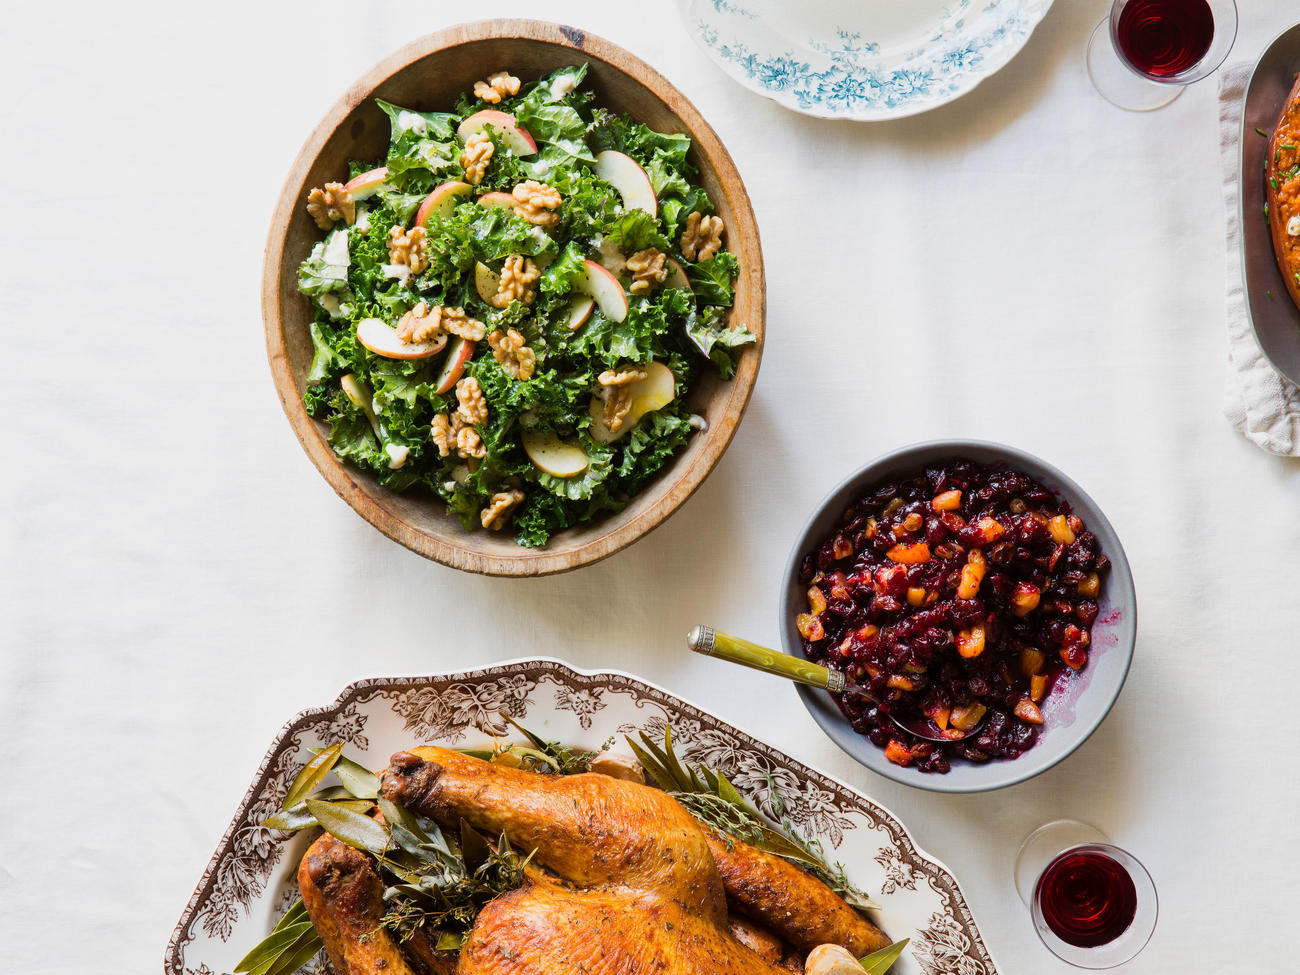 16 Healthy Thanksgiving Recipes That You’ll Want to Make Every Year